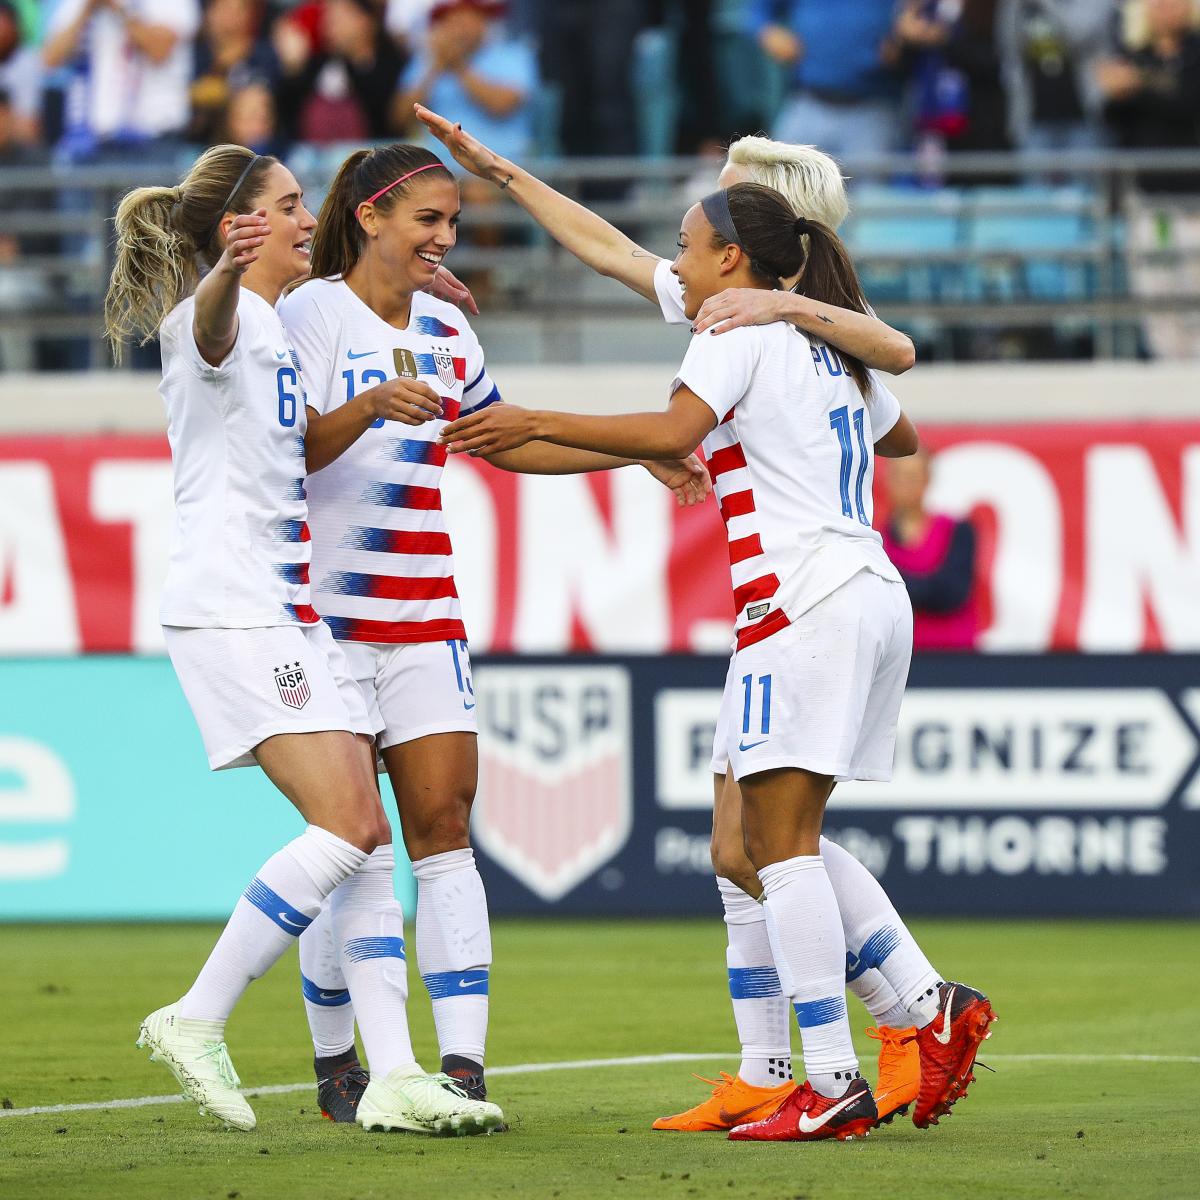 USA vs. Mexico: Date, Time, Live Stream for 2018 Women's Soccer